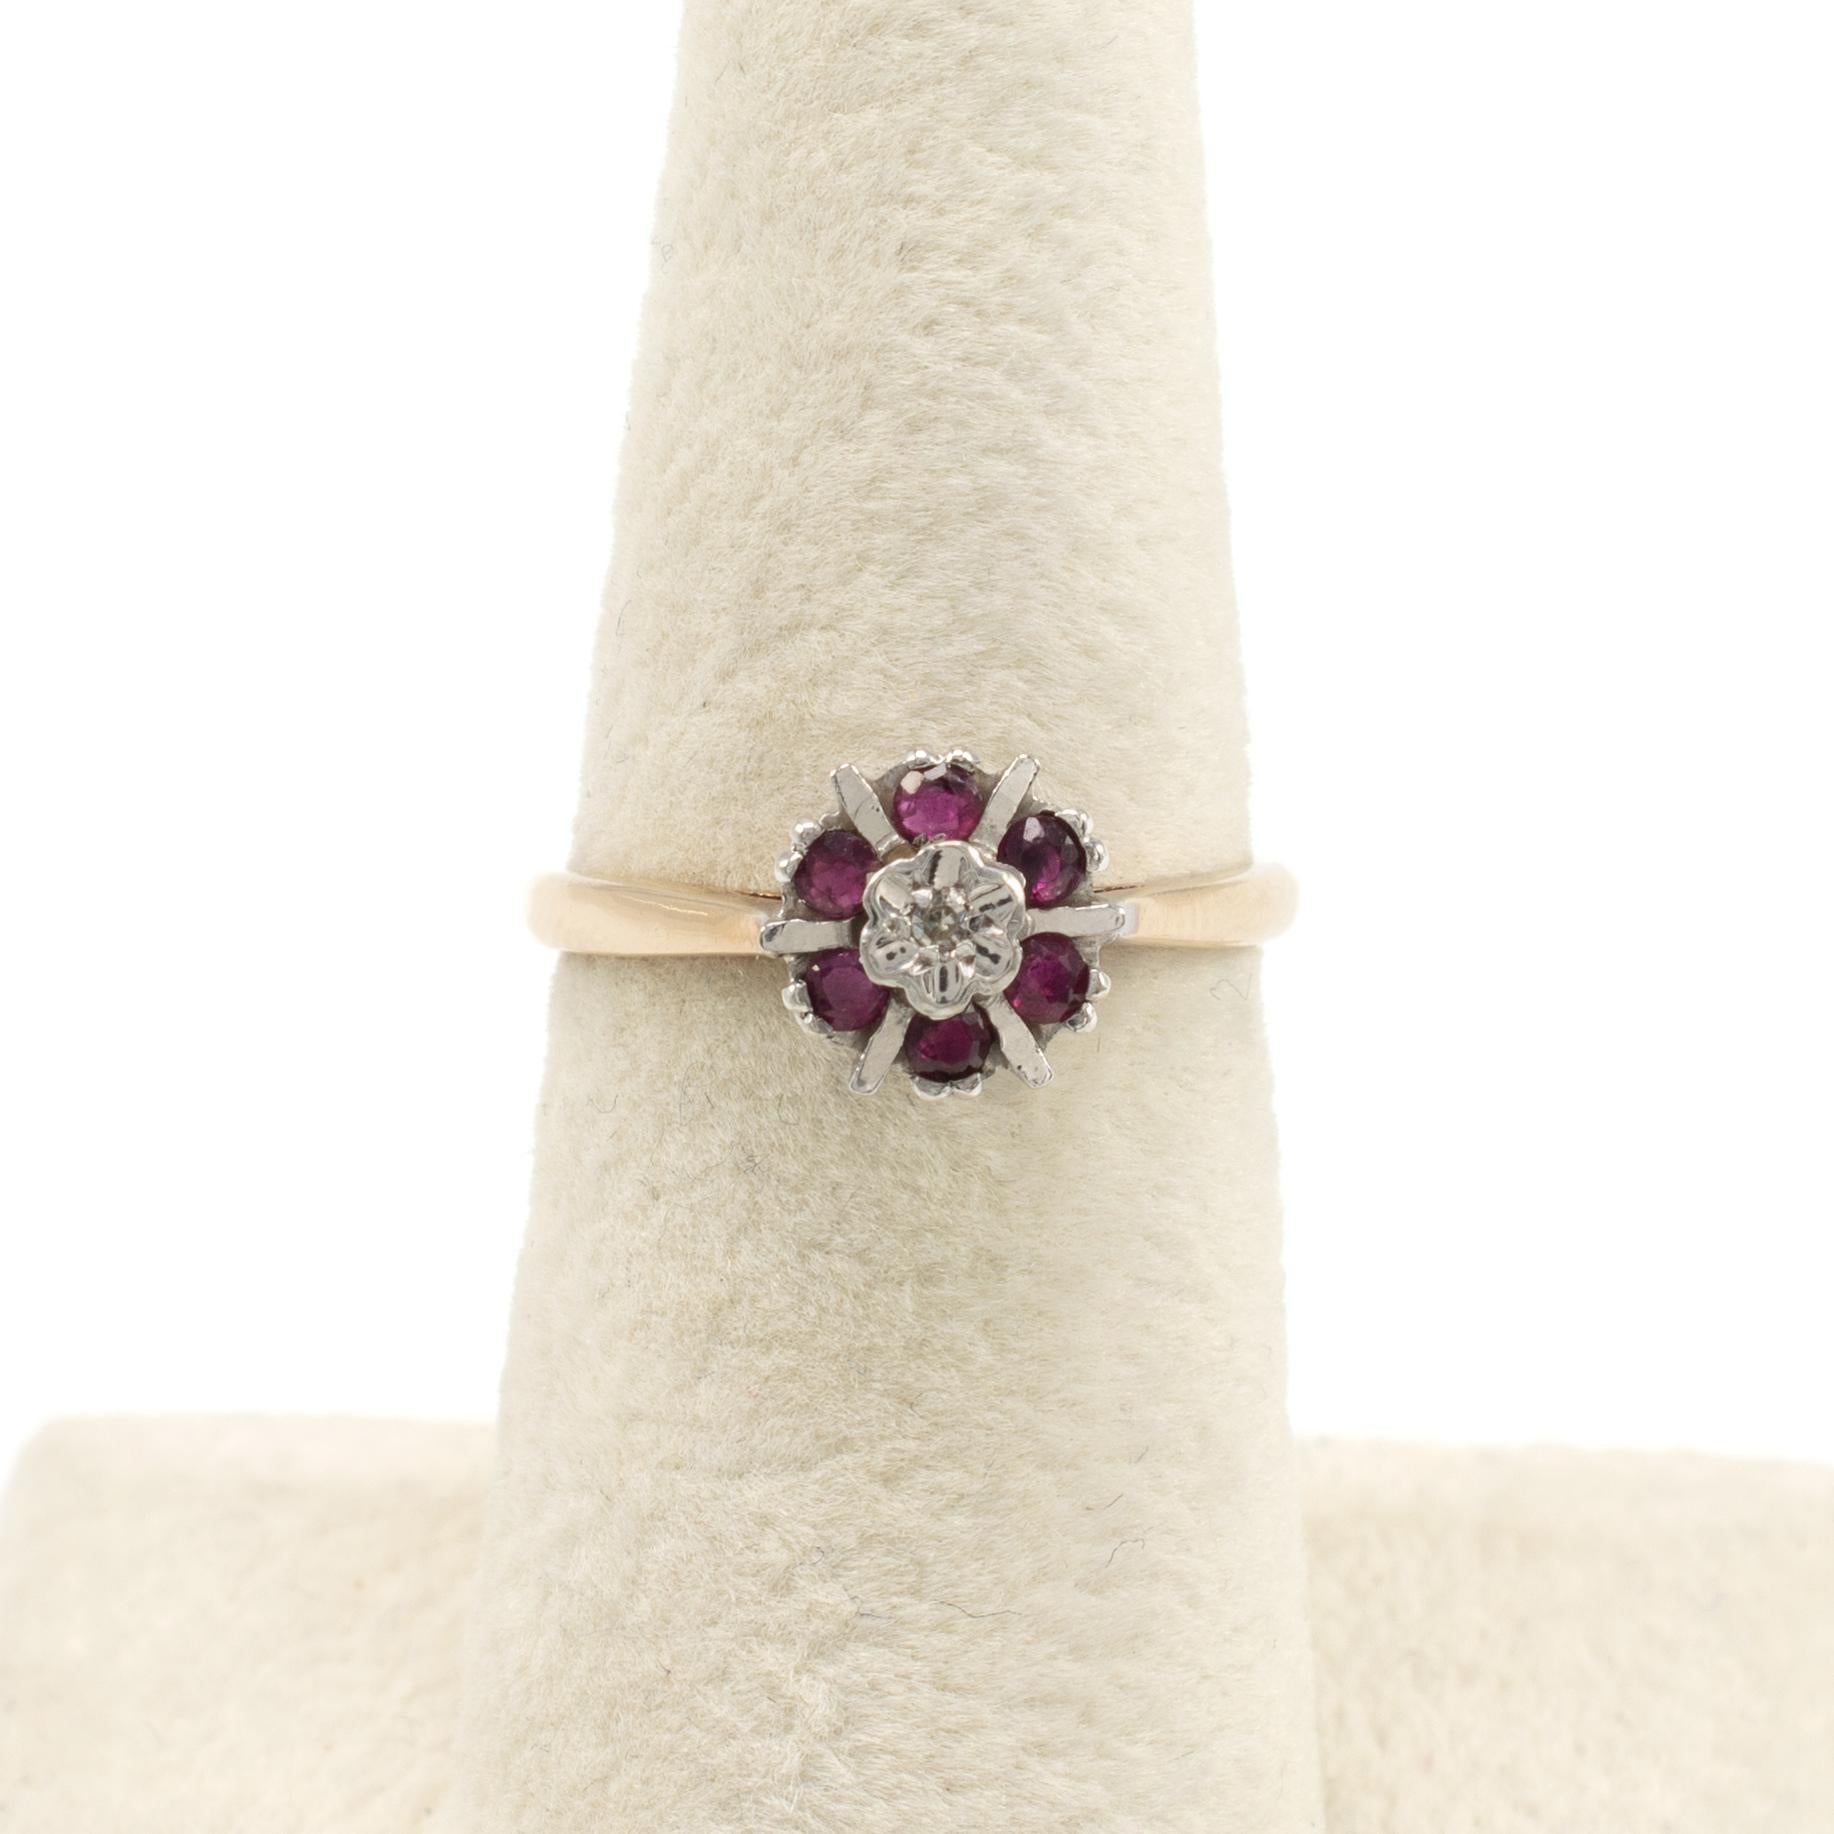 This pretty vintage ruby and diamond ring is beautifully made in yellow gold and features a tall platinum circular two tier mount set with center diamond and 6 complimenting rich rubies.

We have checked, cleaned and polished the ring and it comes